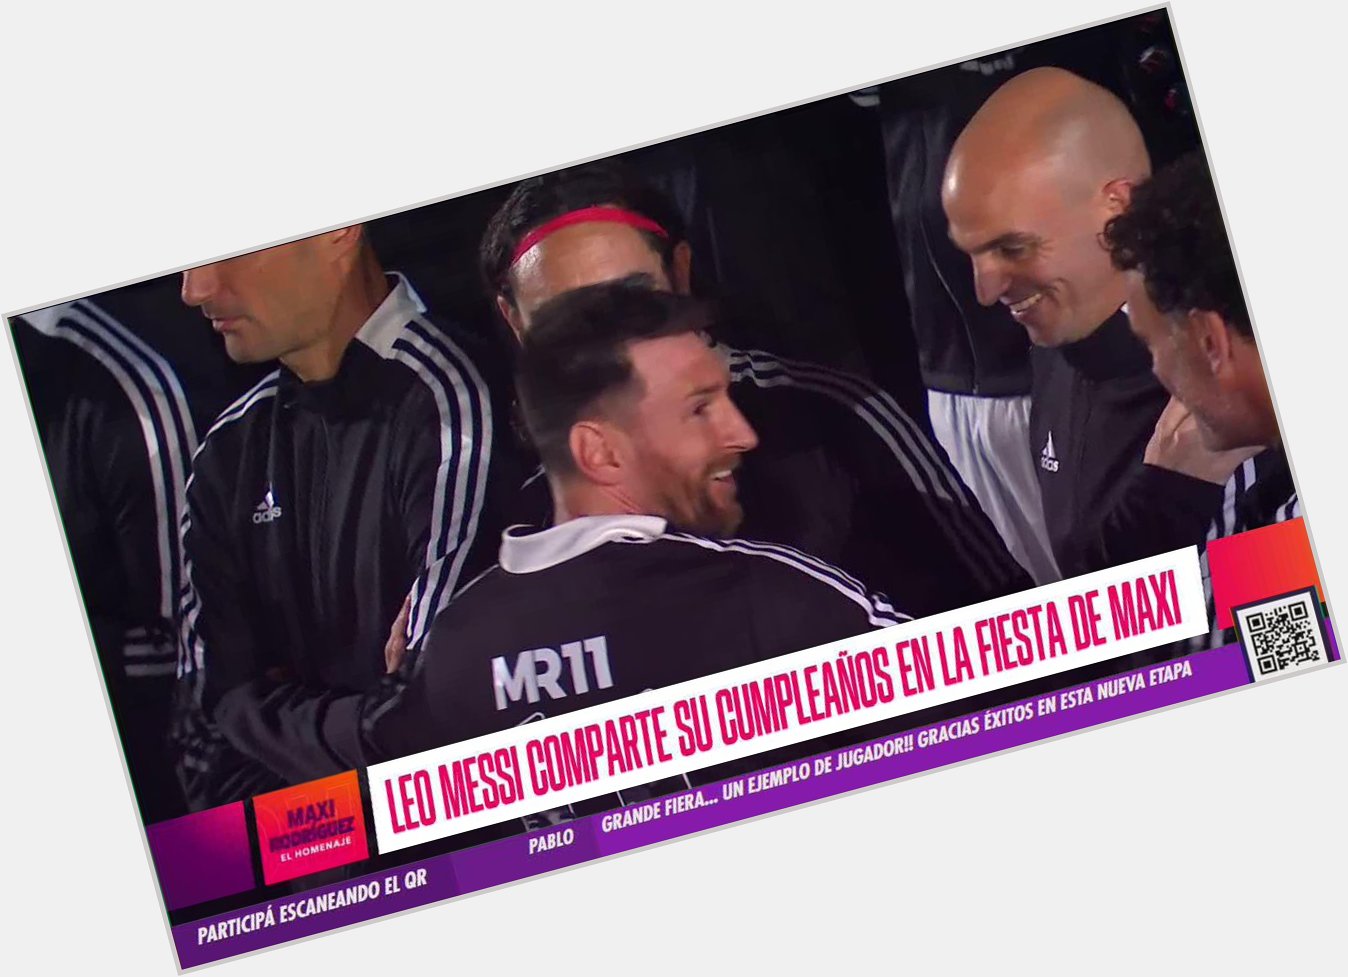 Lionel Messi is back in his hometown Rosario and the whole stadium sang happy birthday.   